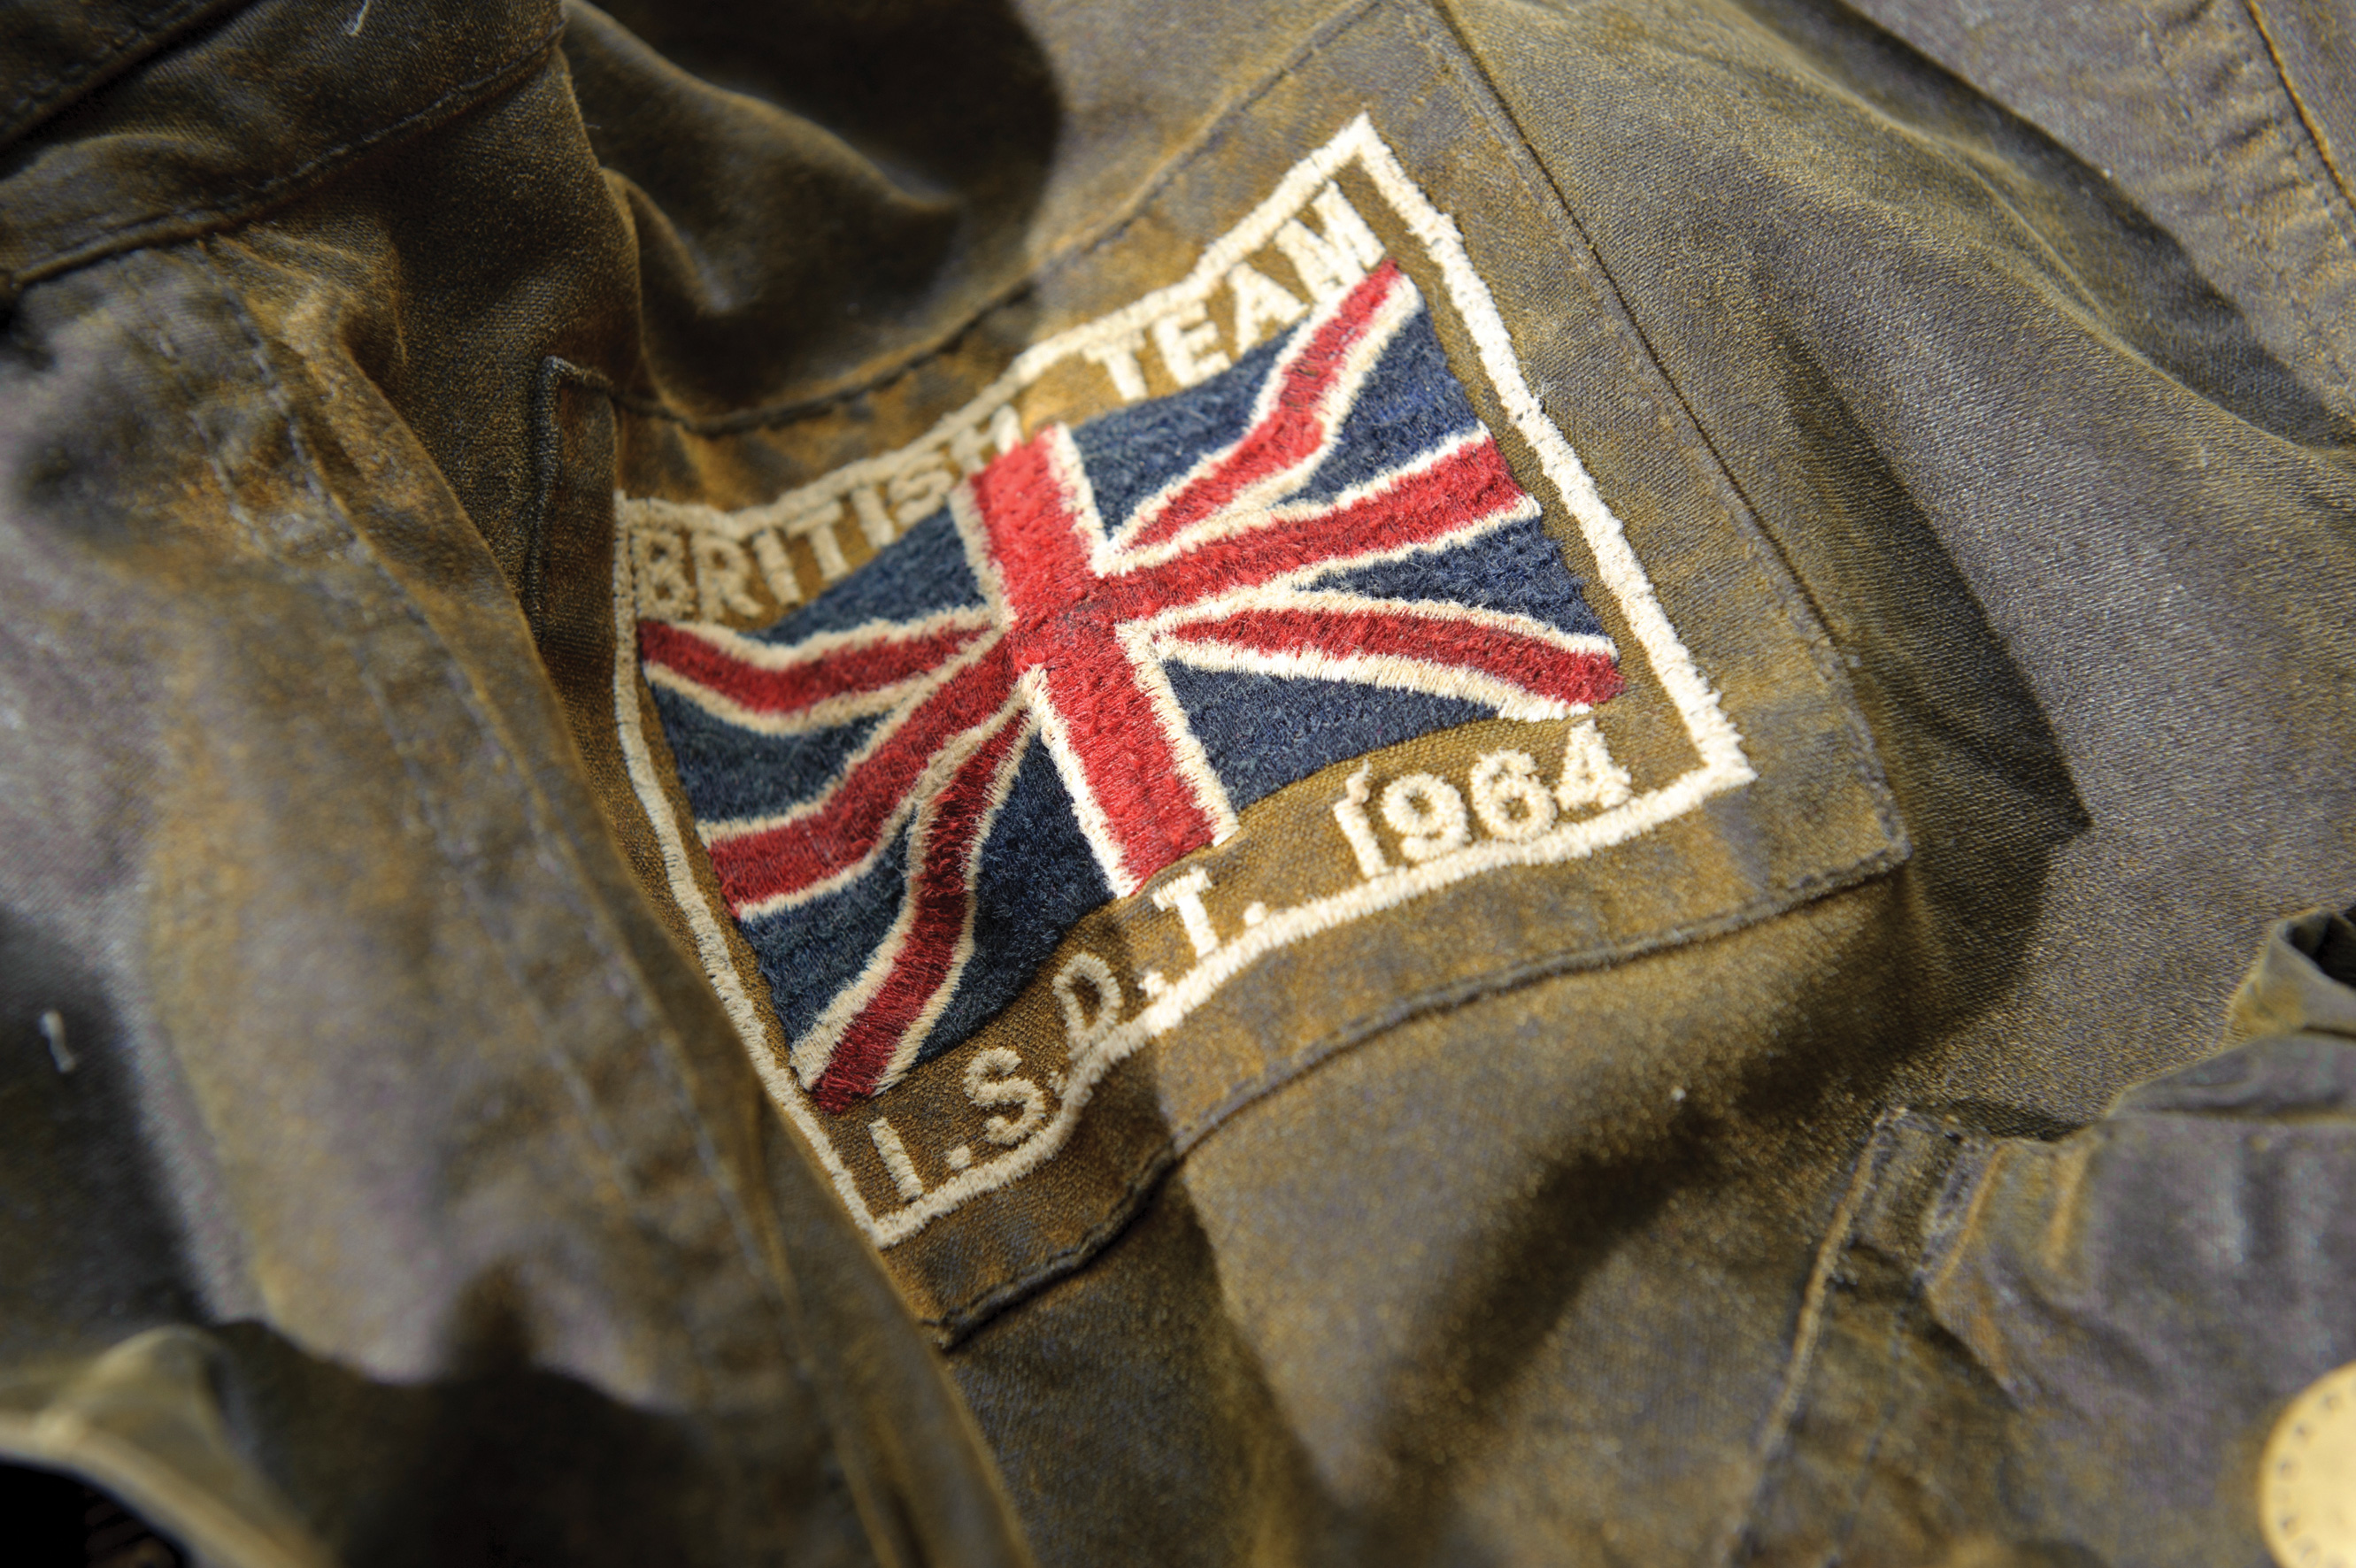 Barbour 75th anniversary International jackets | Lineage of influence